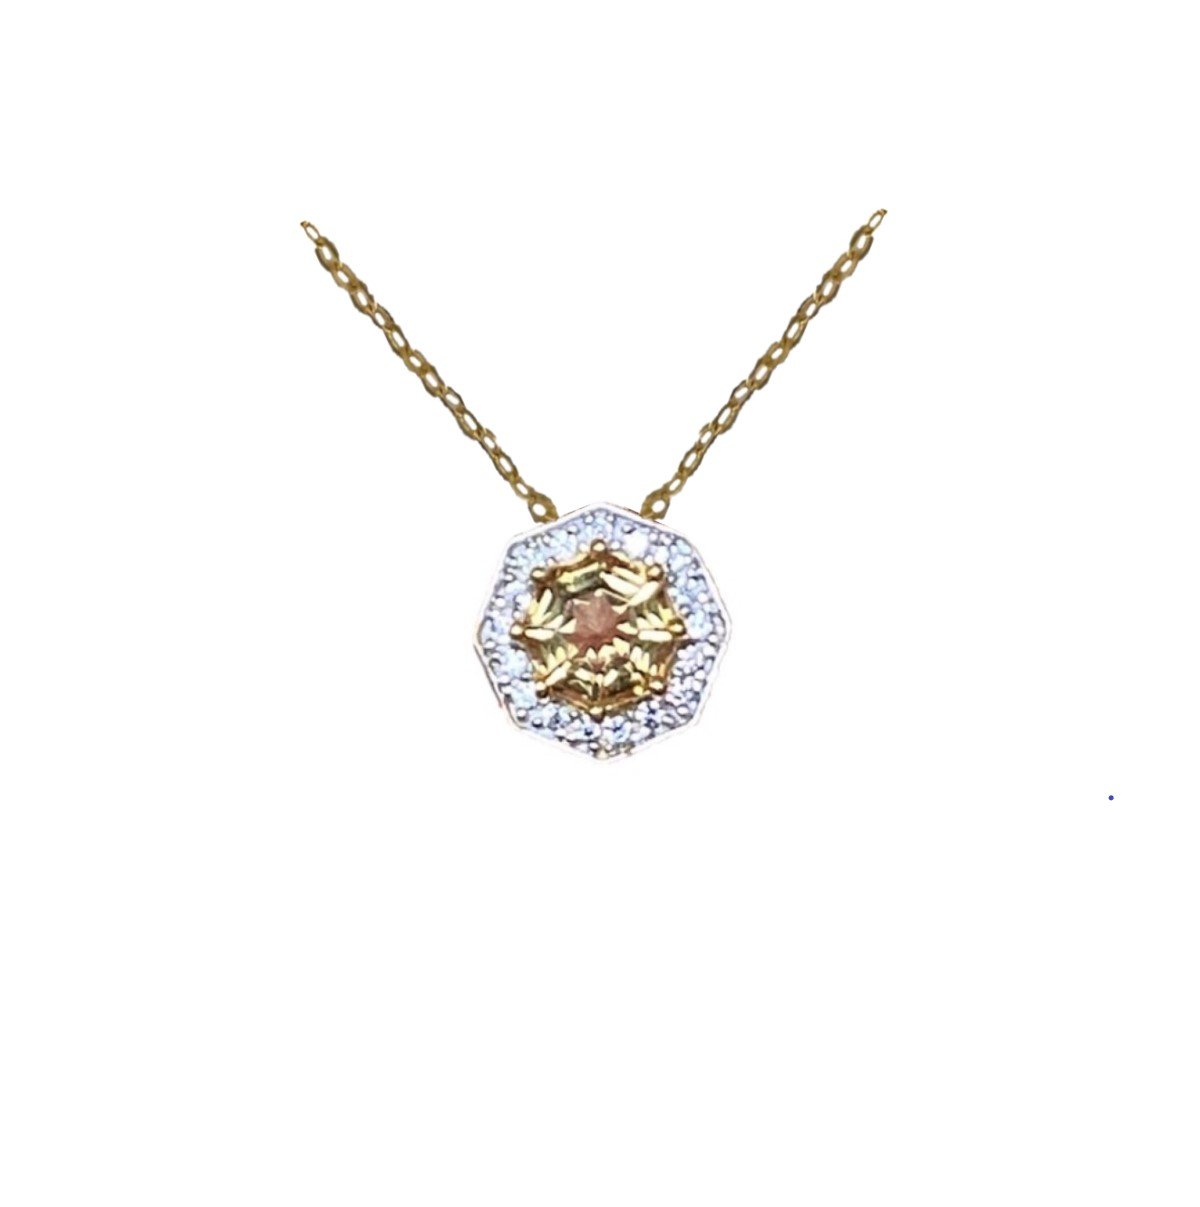 2ct. Citrine & Natural White Zircon Halo Pendant Necklace,18K Gold Plated Silver, 18 inch Chain november birthstone fine jewelry gifts for women 